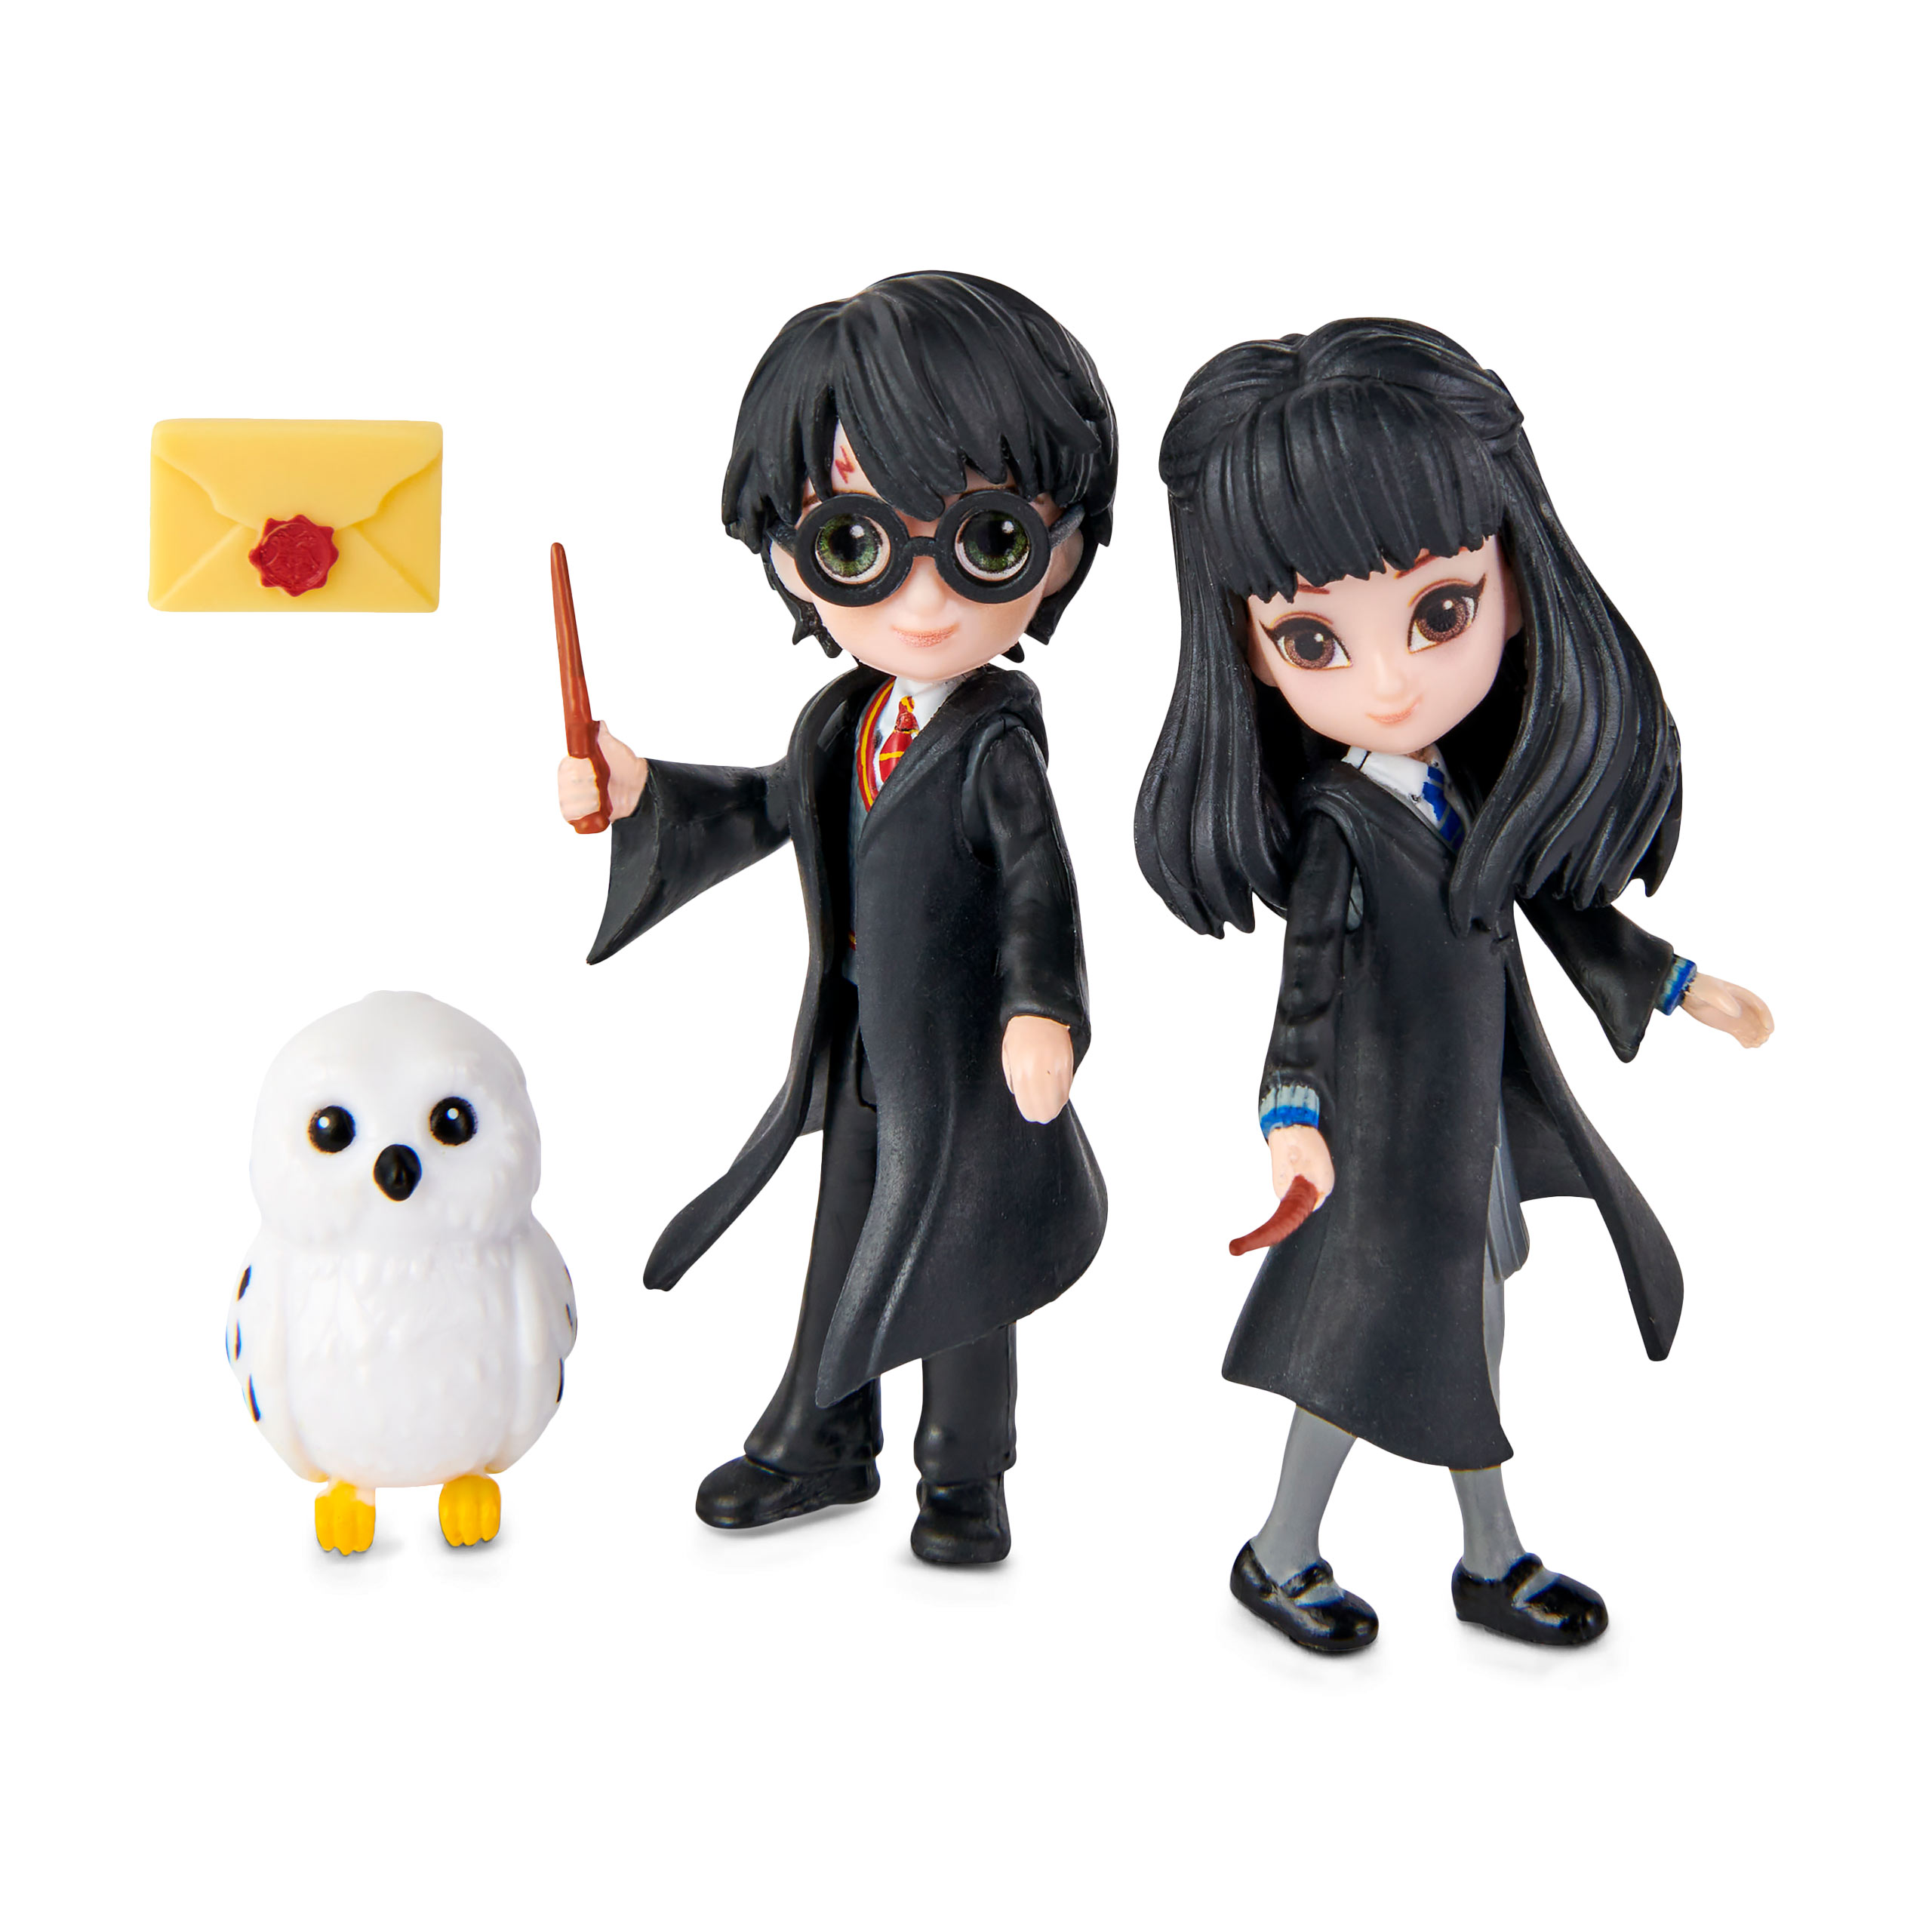 Harry Potter - Harry, Cho, Hedwig and Hogwarts Letter Collectible Figure Set